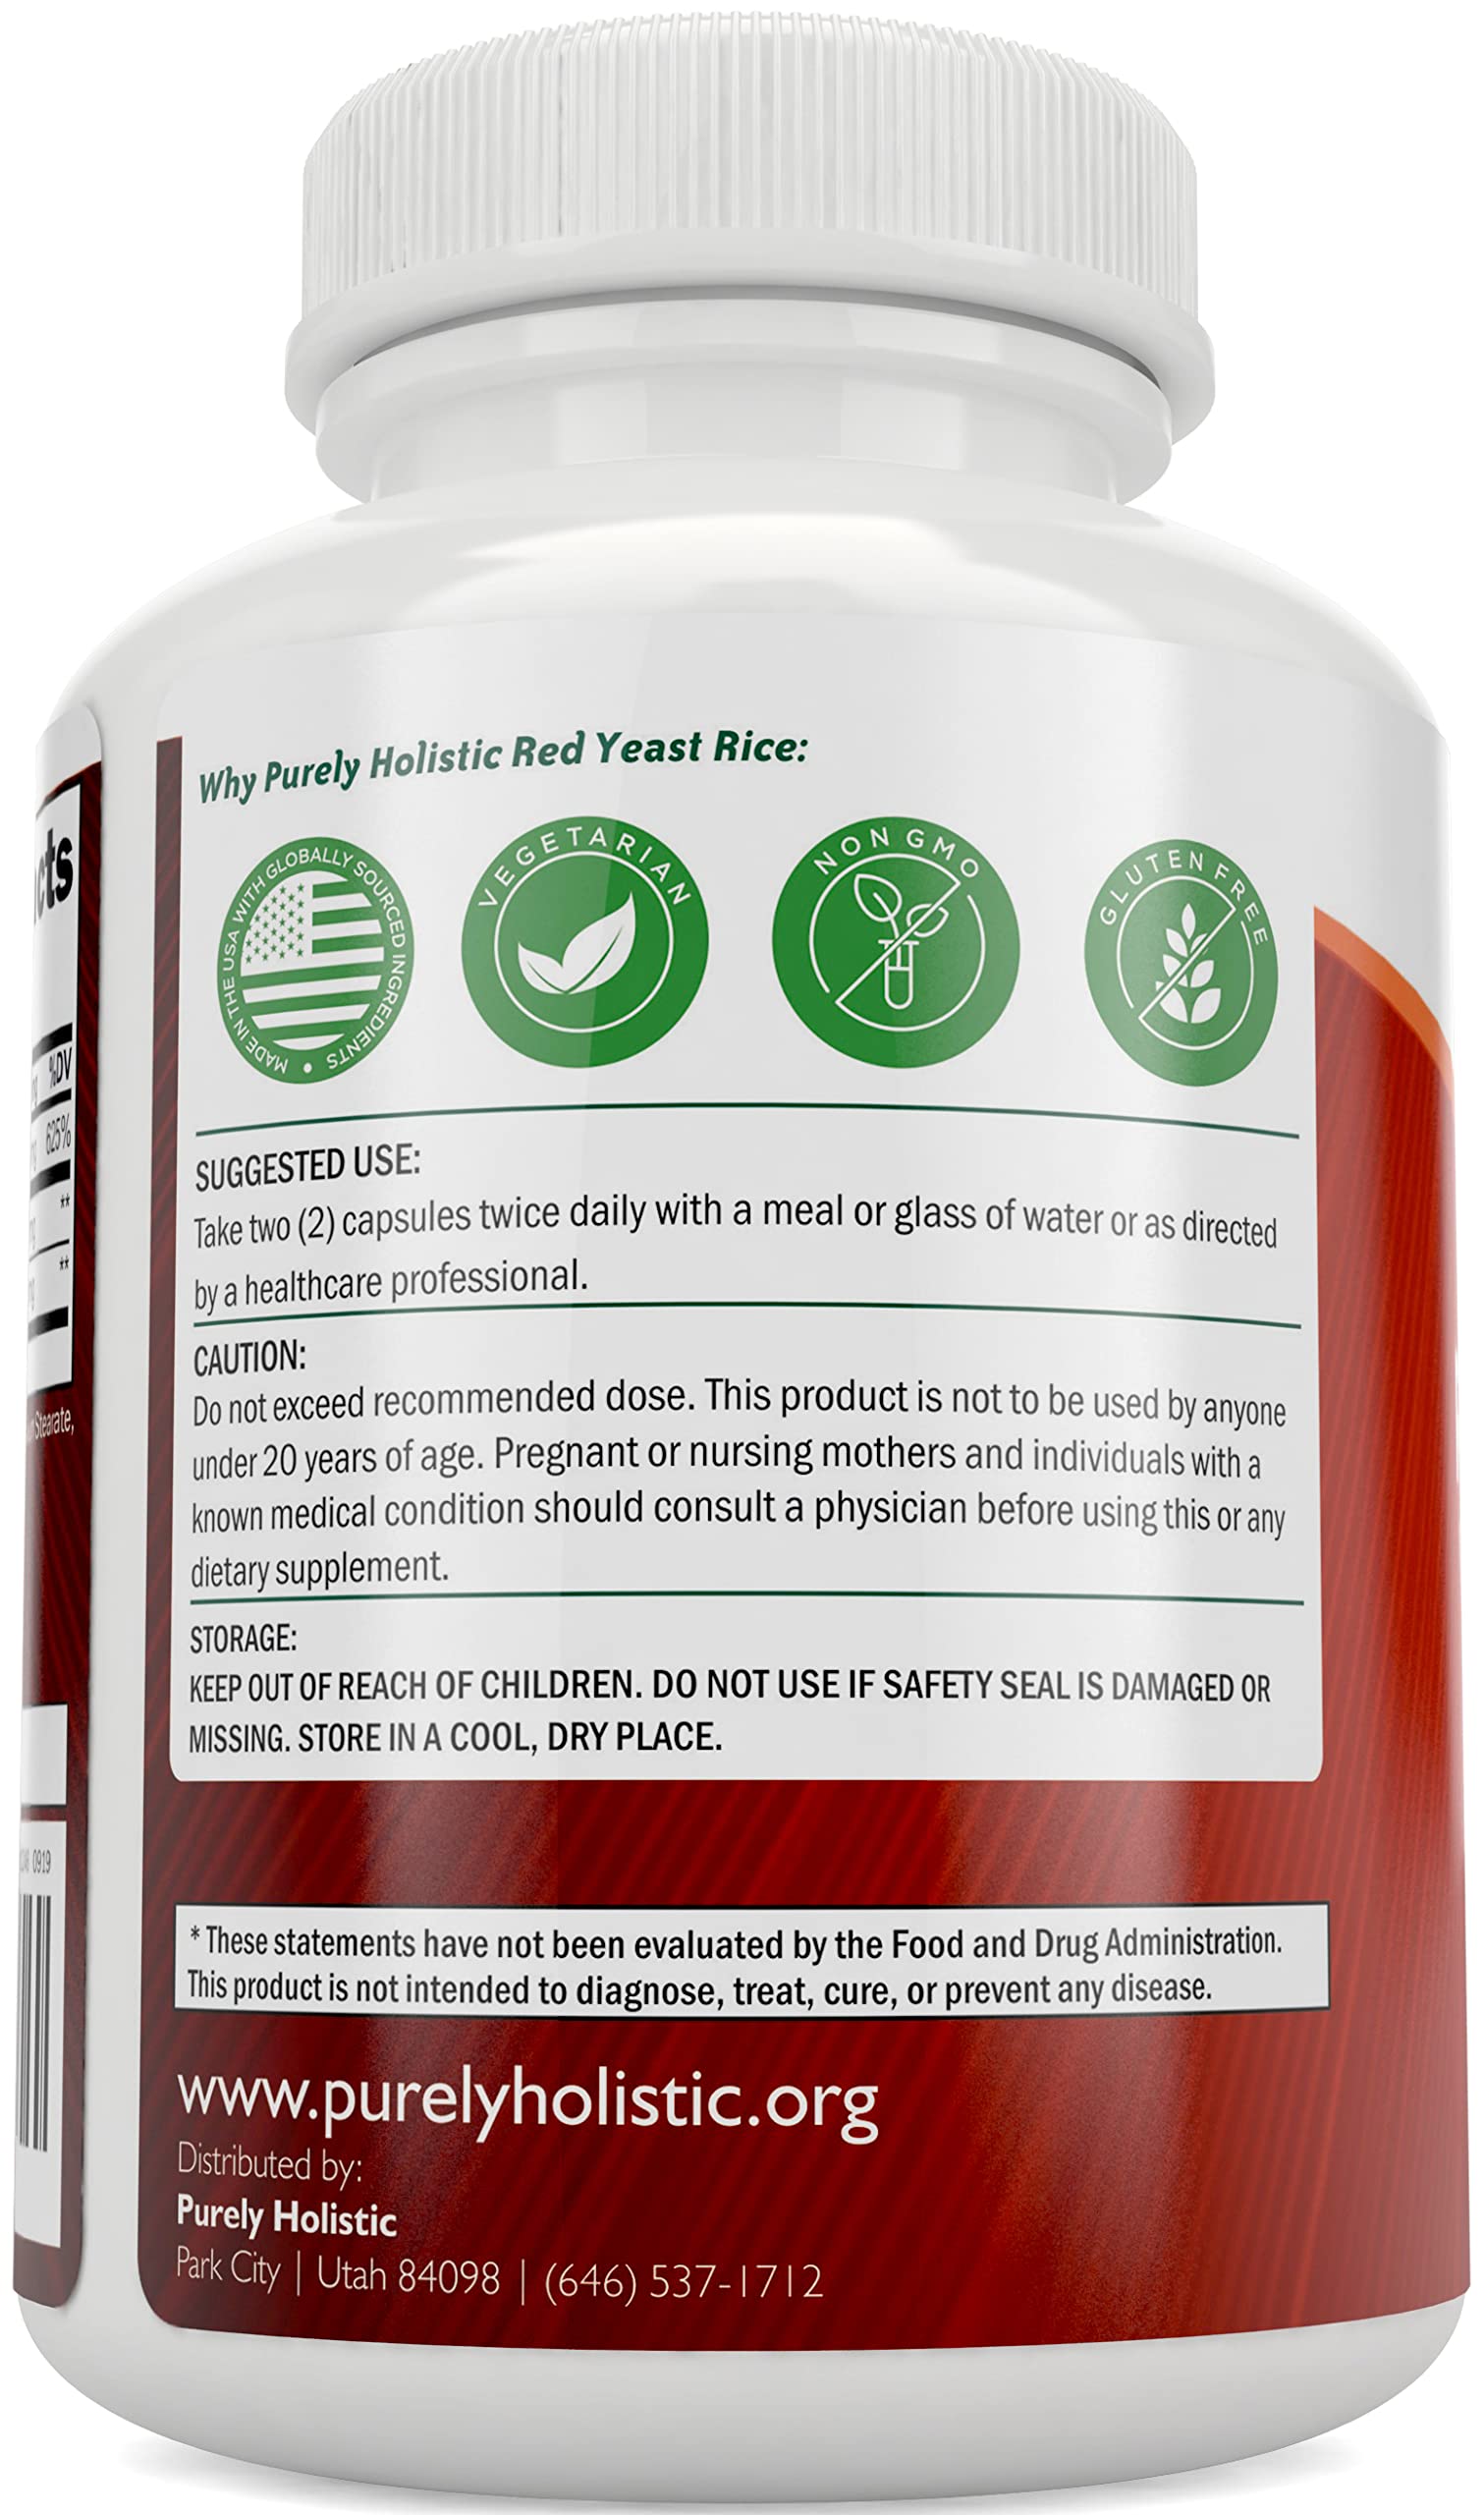 Purely Holistic Red Yeast Rice 1200mg with CoQ10 & Niacin + Hawthorn 665mg Bundle - 270 Capsules - Made in USA